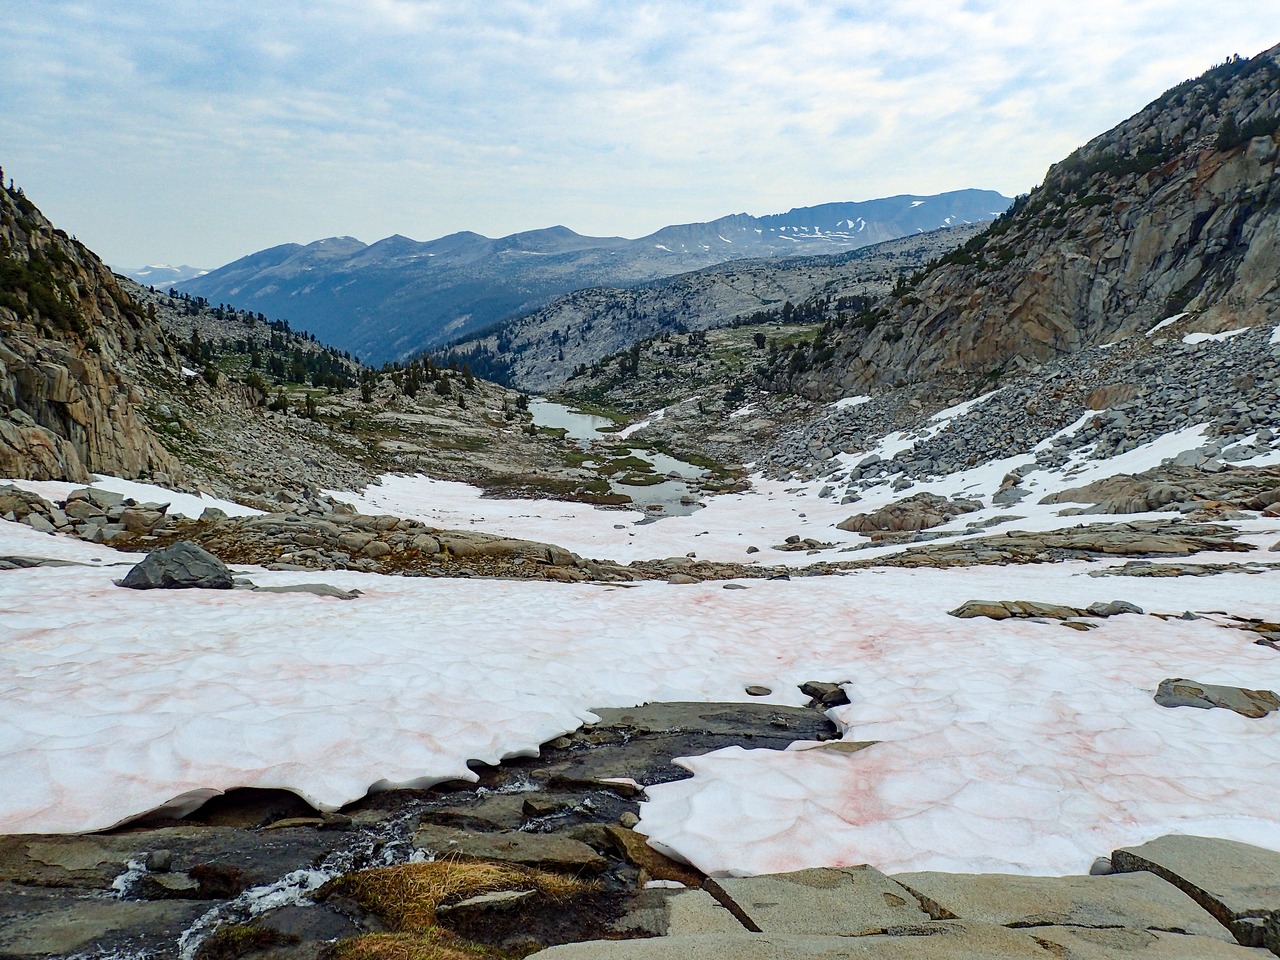 A landscape photo showing the view from near Mt. Lyell, in eastern Yosemite National Park, looking out over a snow field toward distant mountains. The snow is streaked with pink algae.